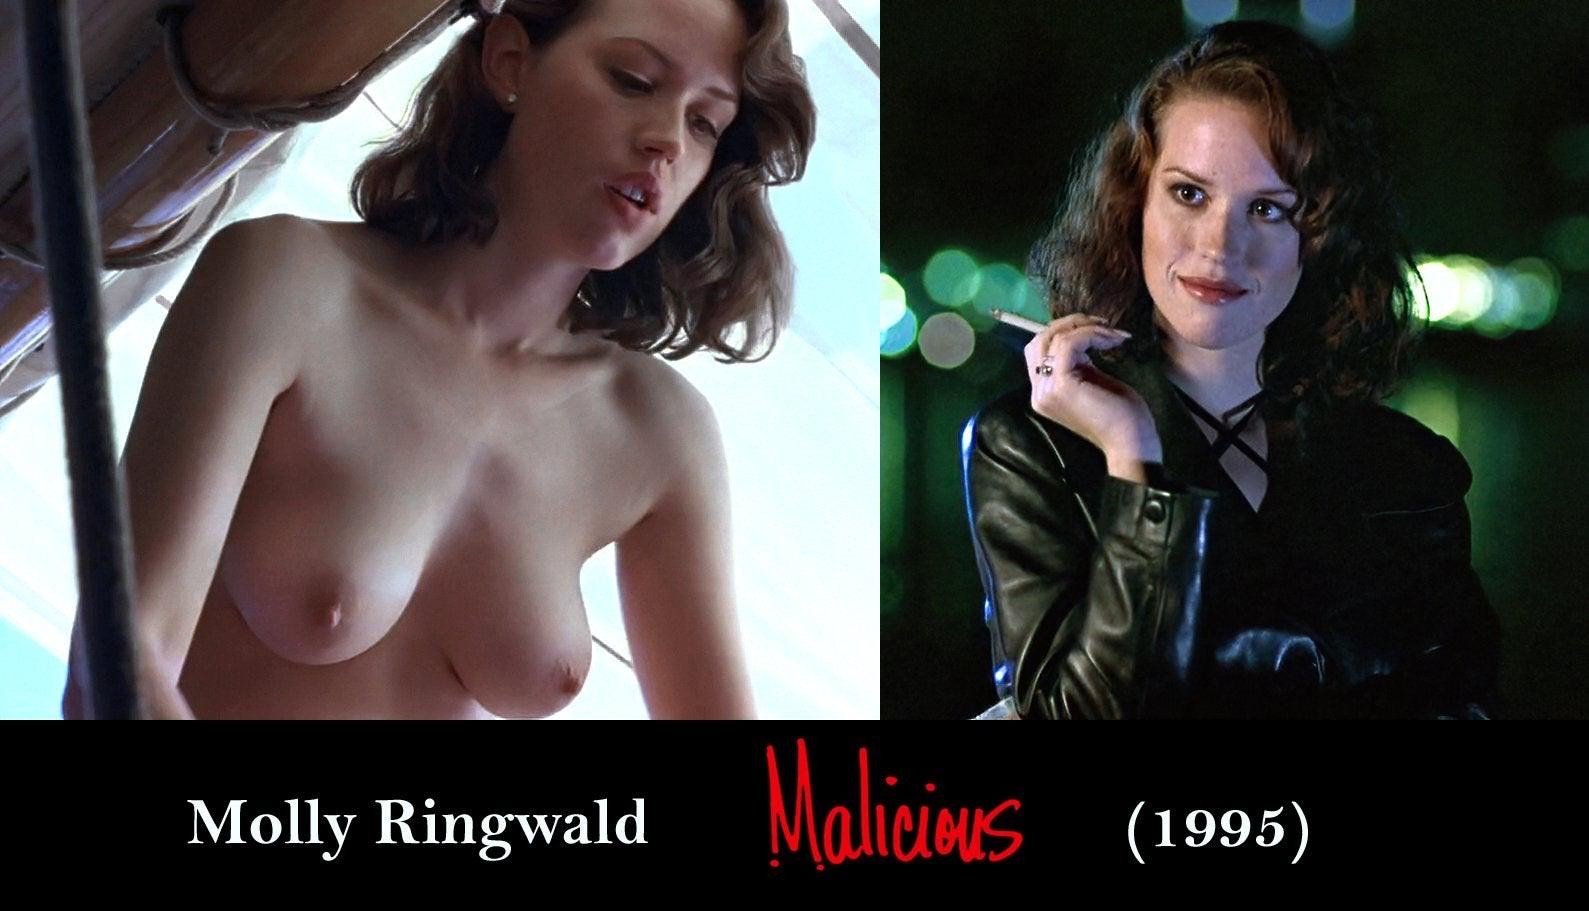 Molly ringwald naked pictures.